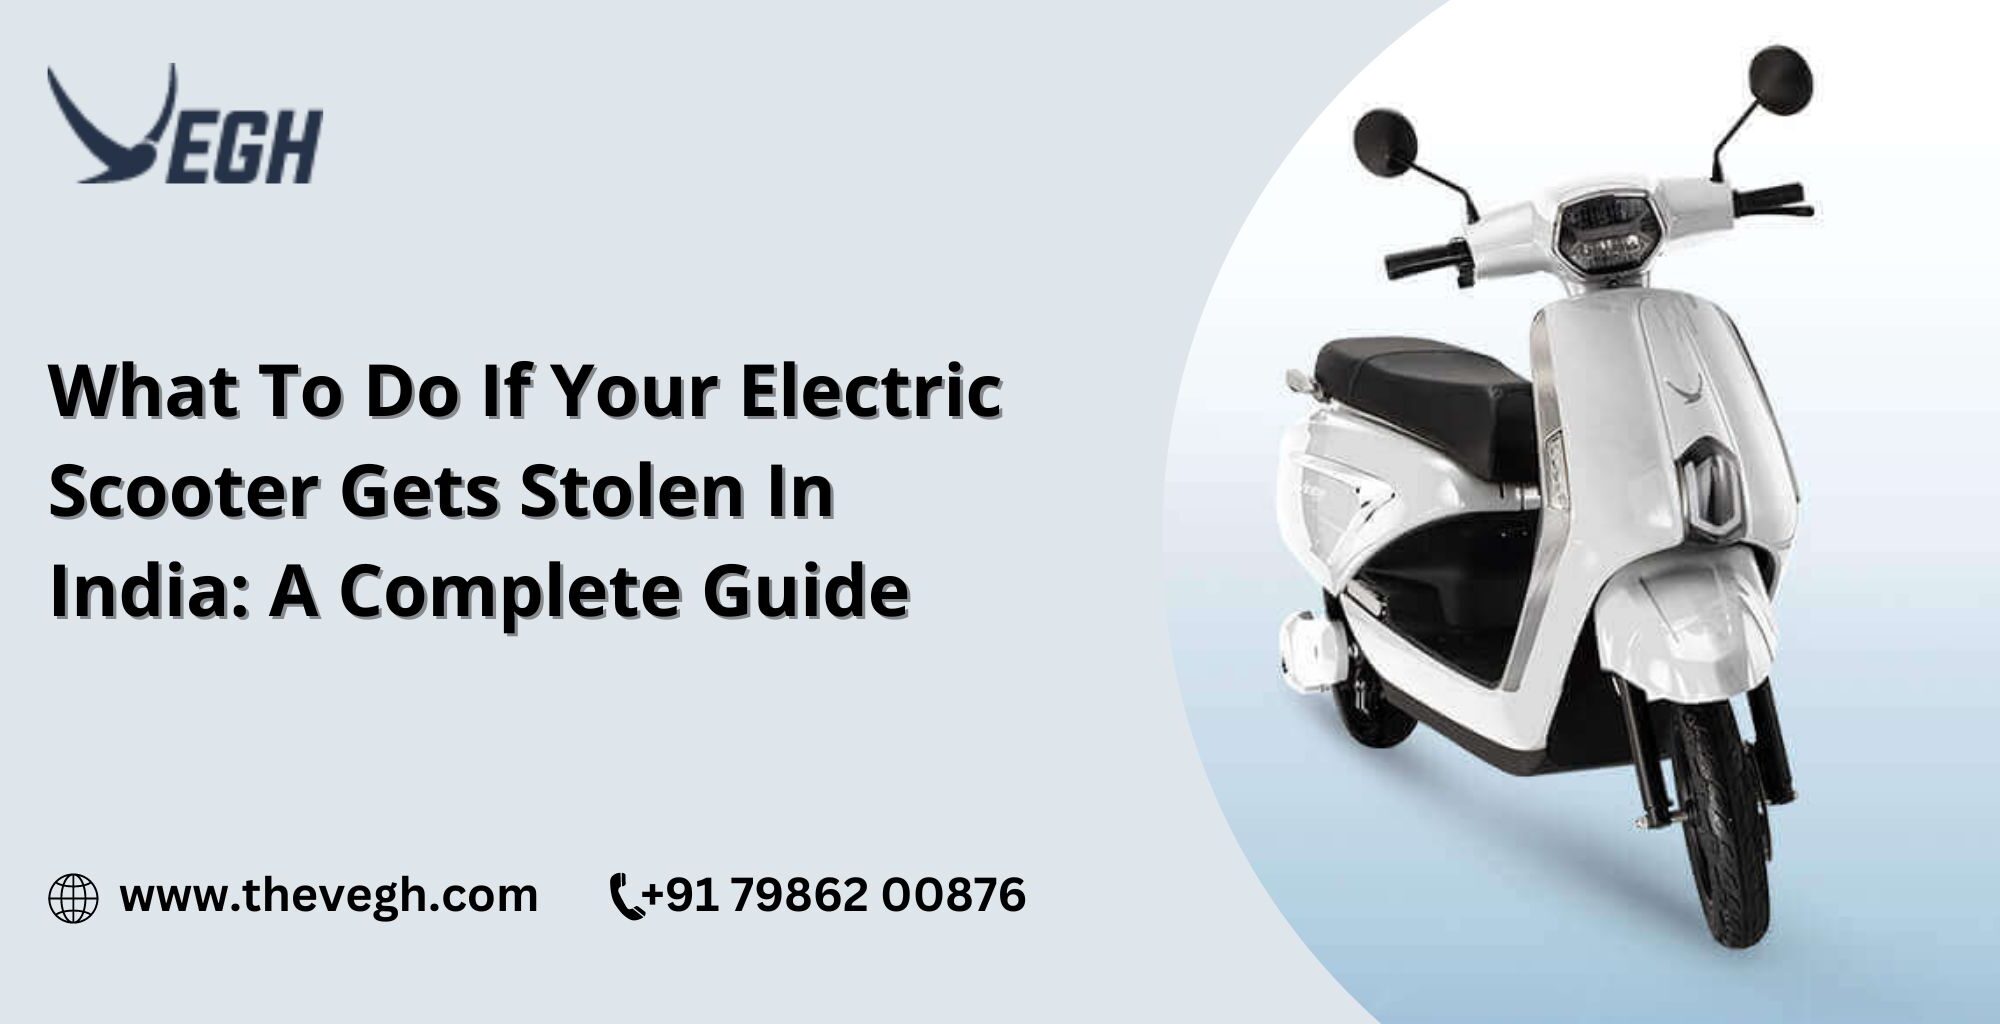 What Do To Do If Your Electric Scooter Gets Stolen In India A Complete Guide